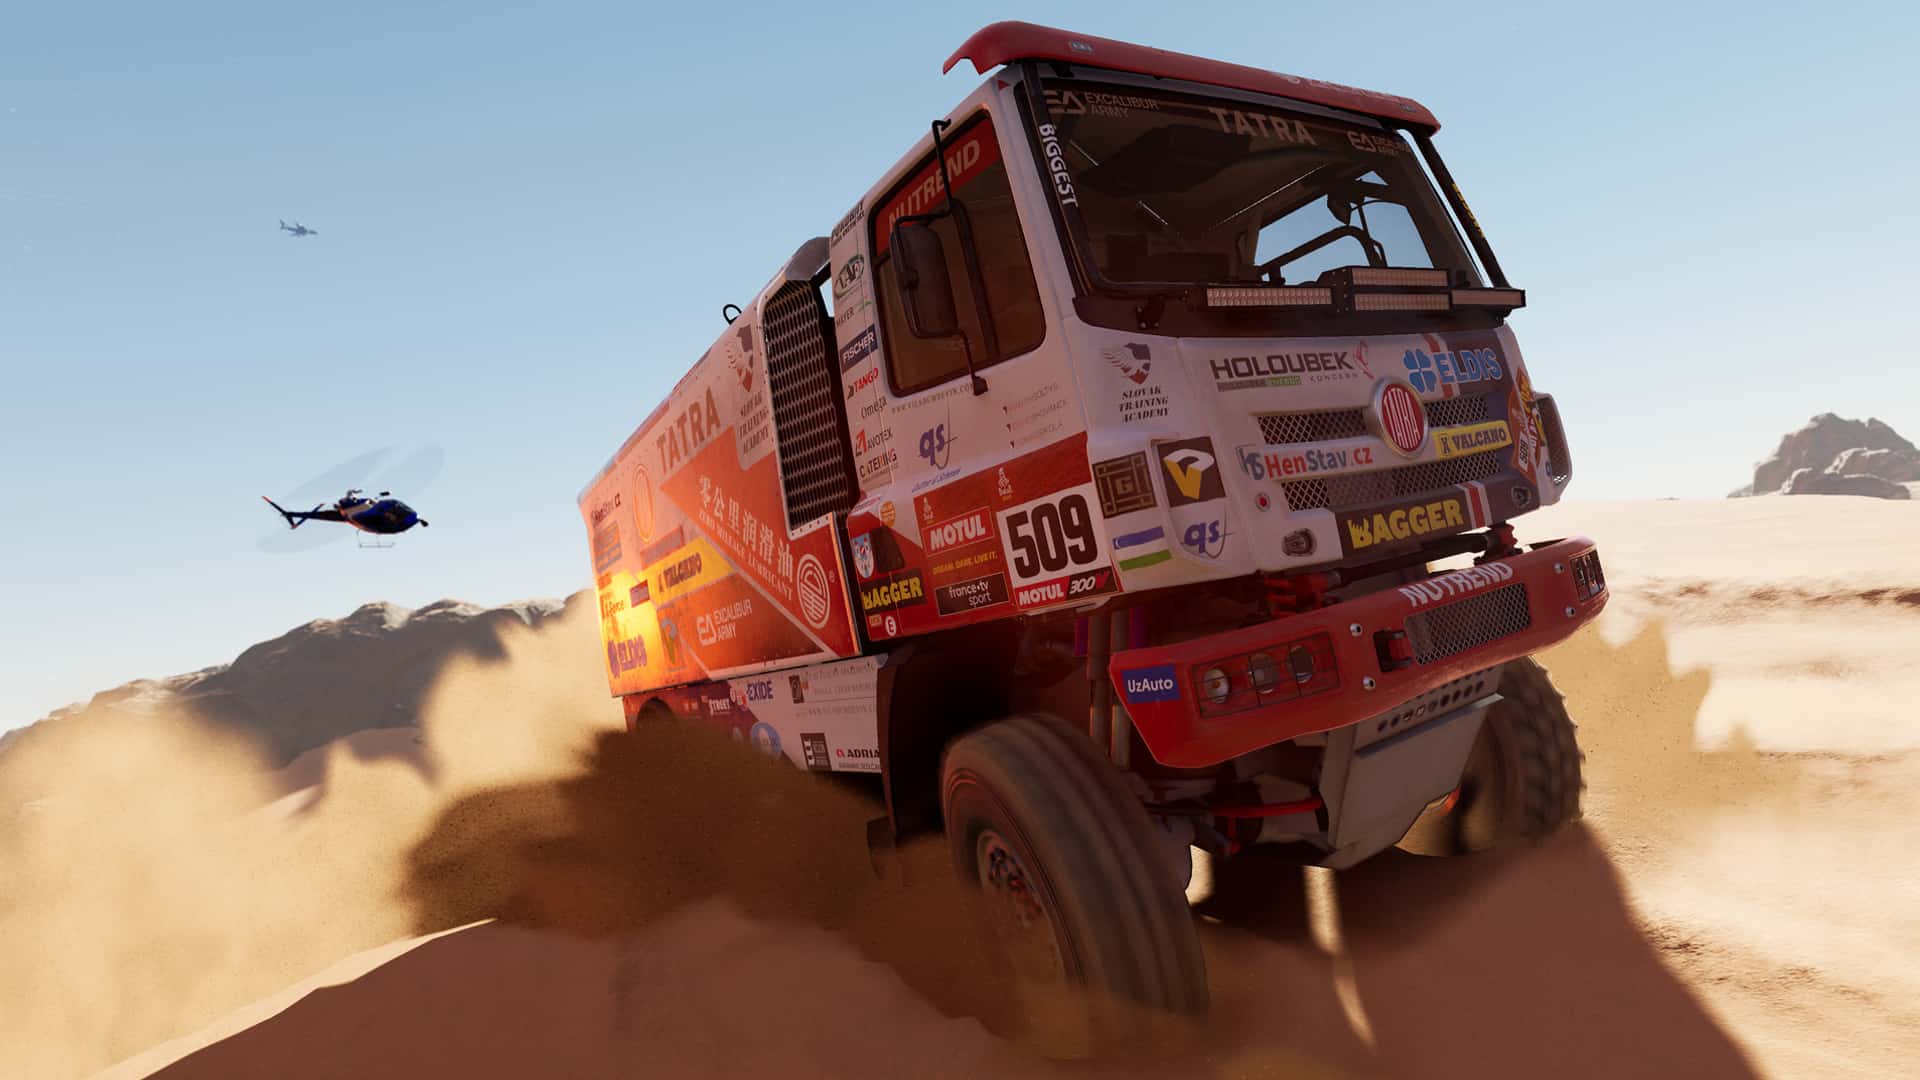 Dakar Desert Rally is a new expedition racing game, launches 2022